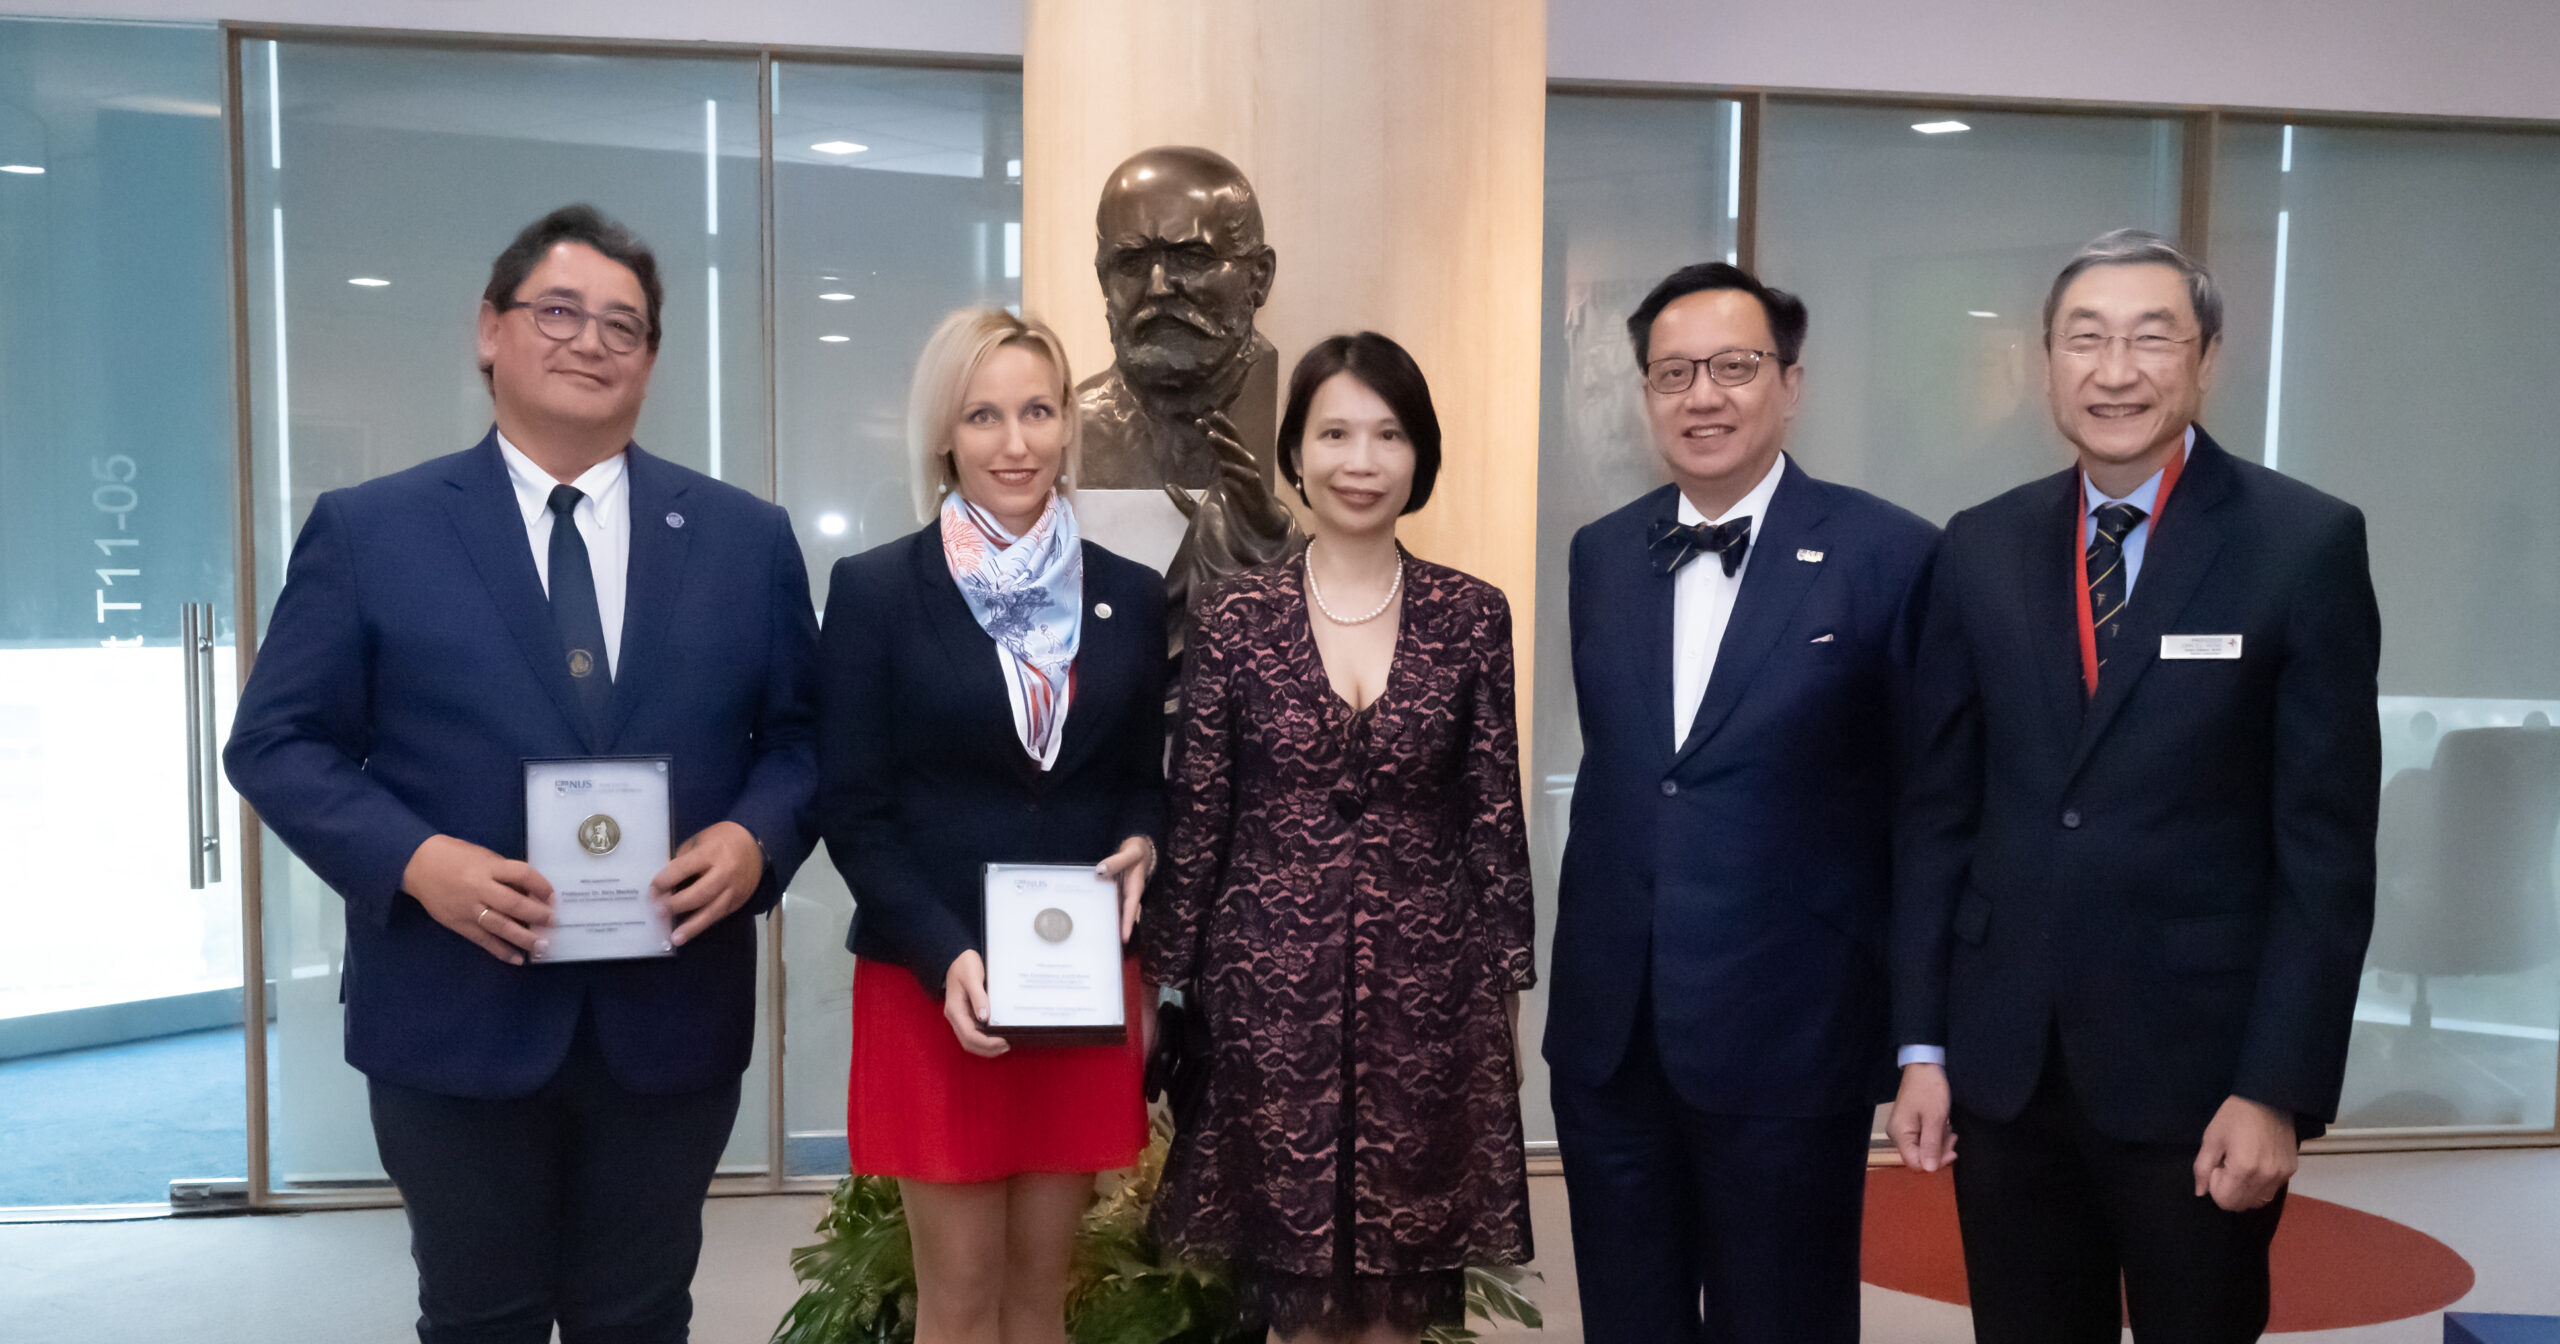 Unveiling Ceremony of Semmelweis statue: NUS Medicine and Semmelweis ...